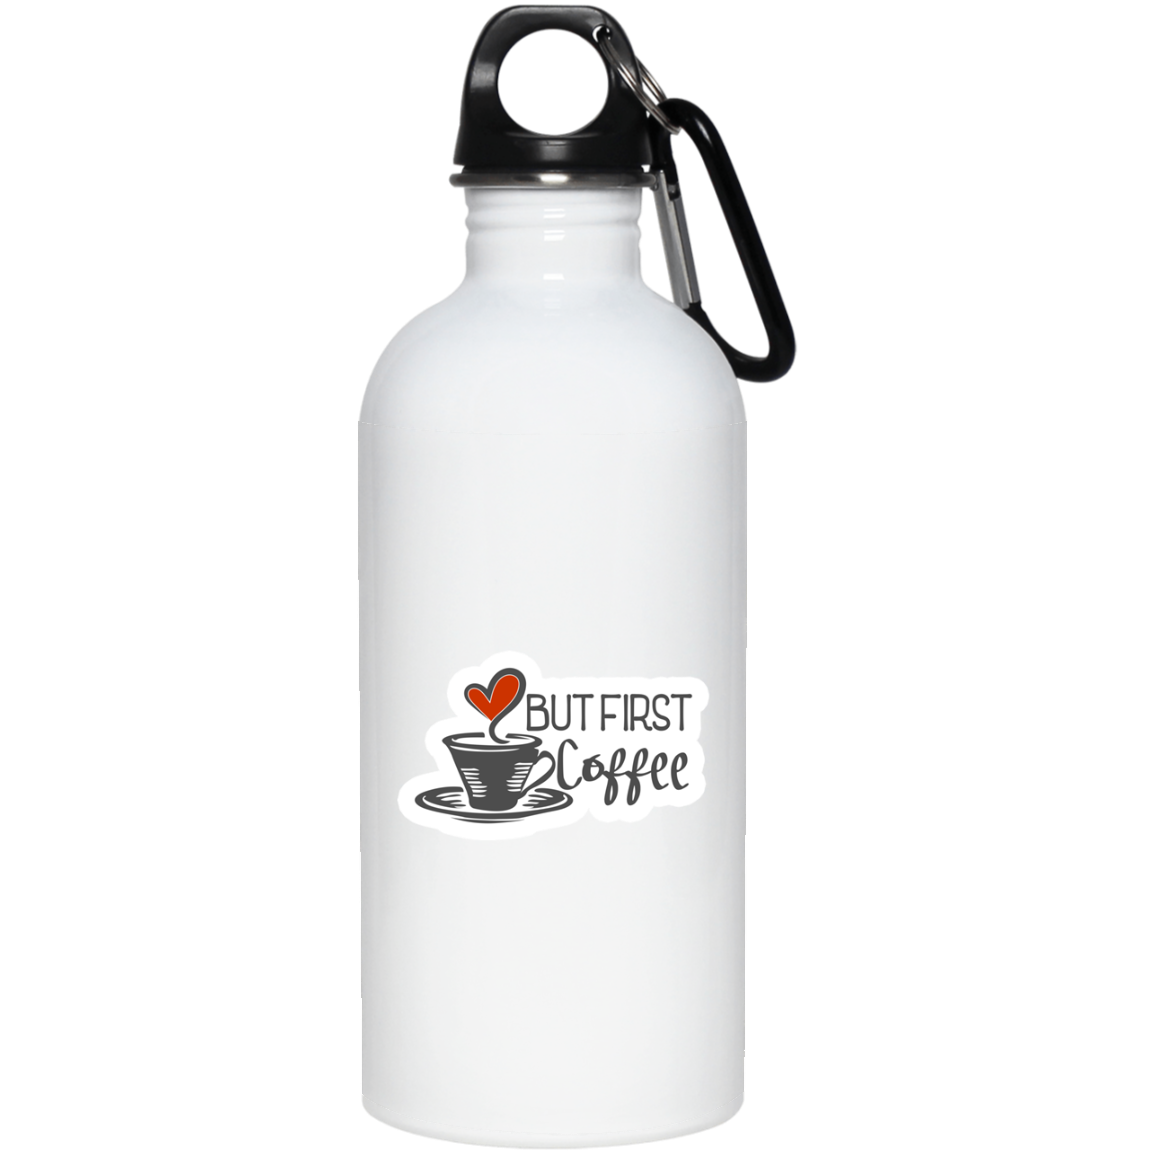 But First Coffee Version 2 - Coffee Sticker 20 oz. Stainless Steel Water Bottle